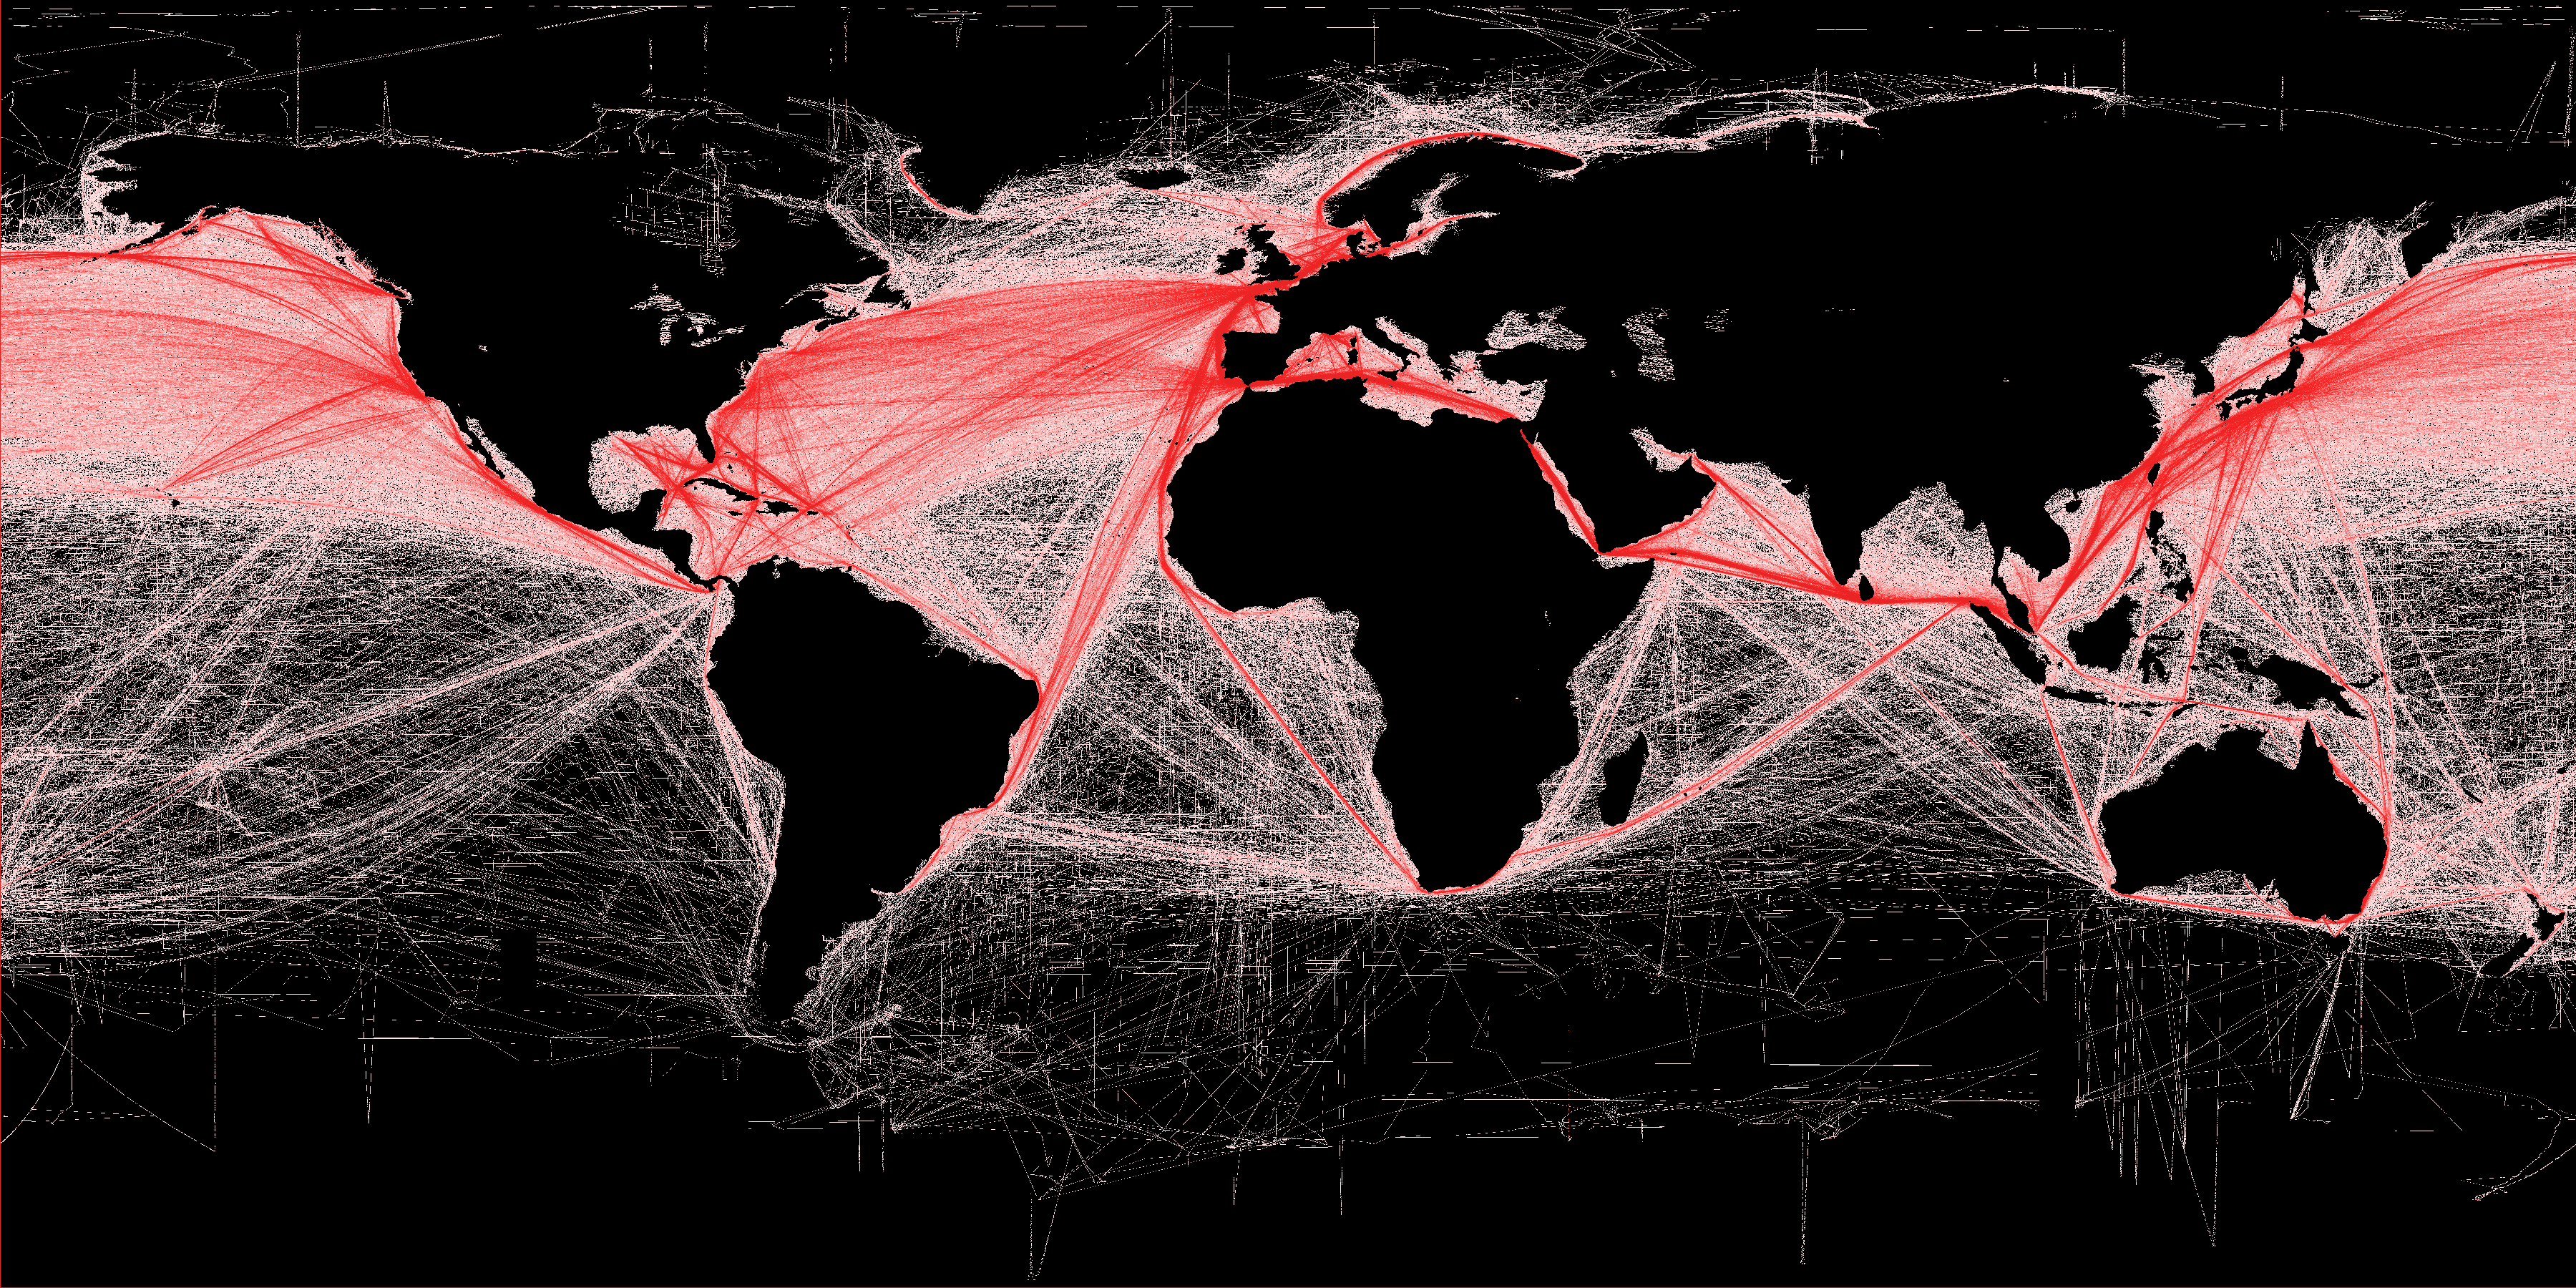 Image of global trade routes